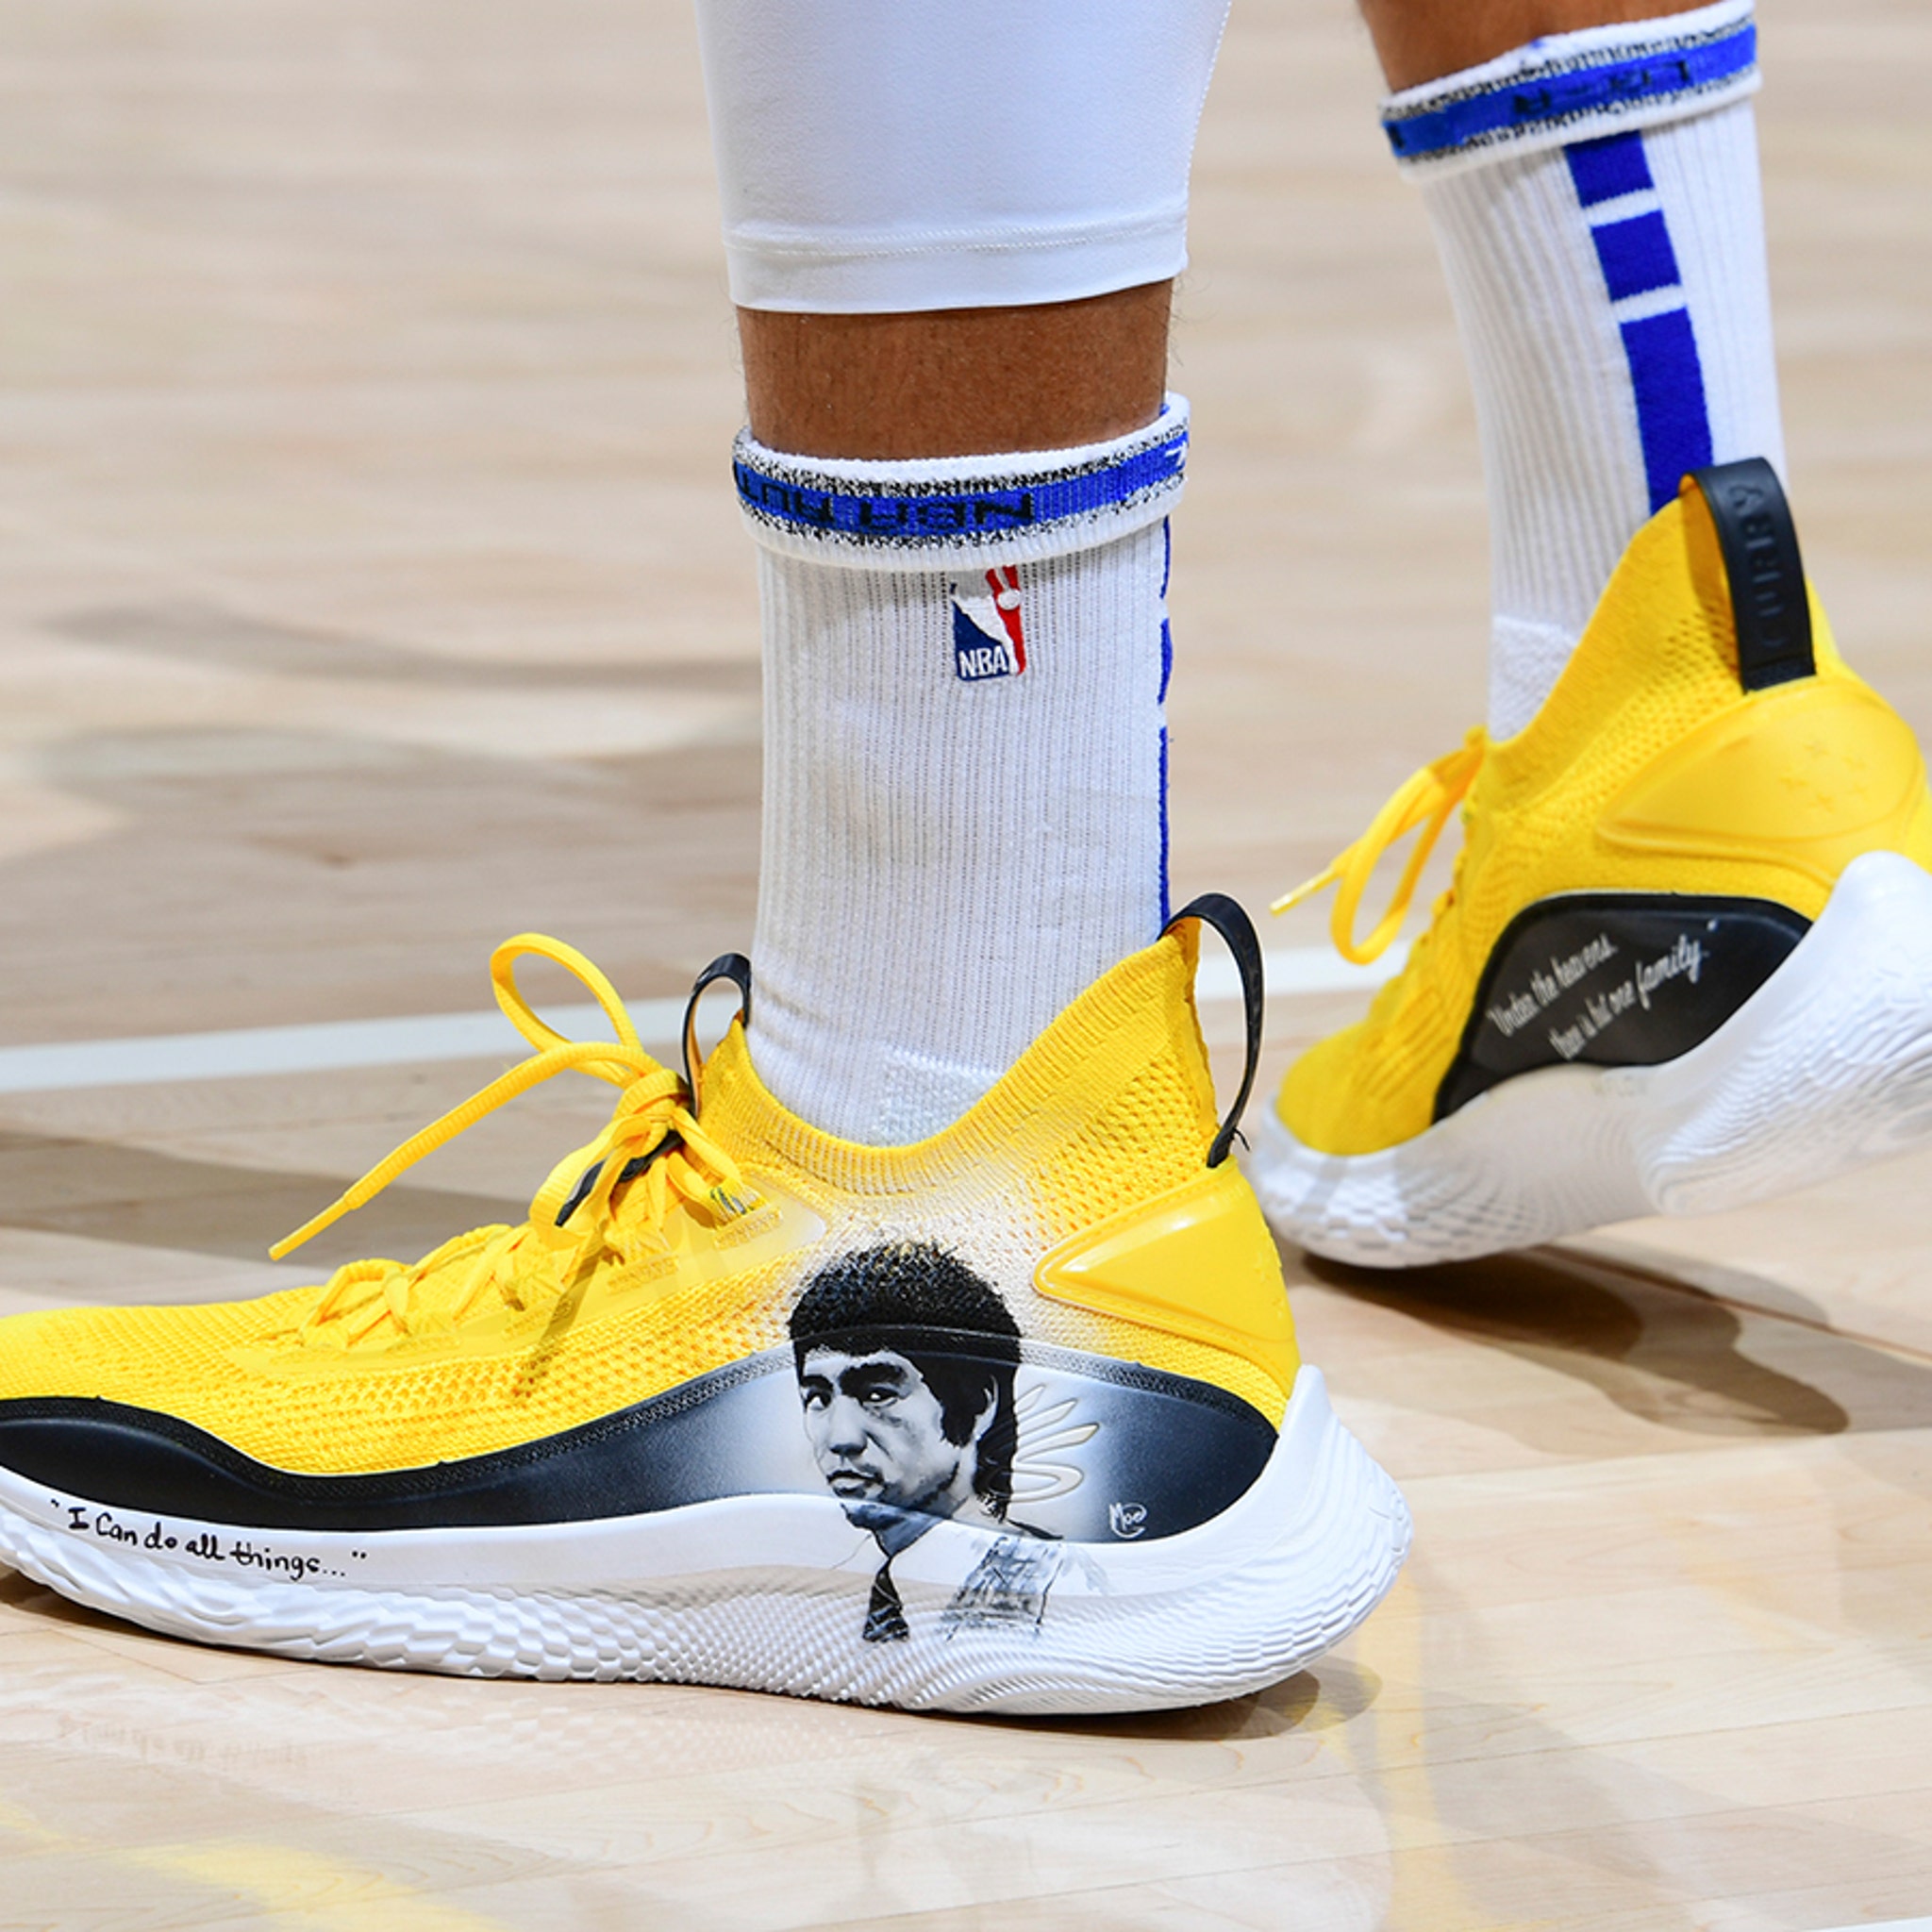 steph curry shoes tonight Off 58 